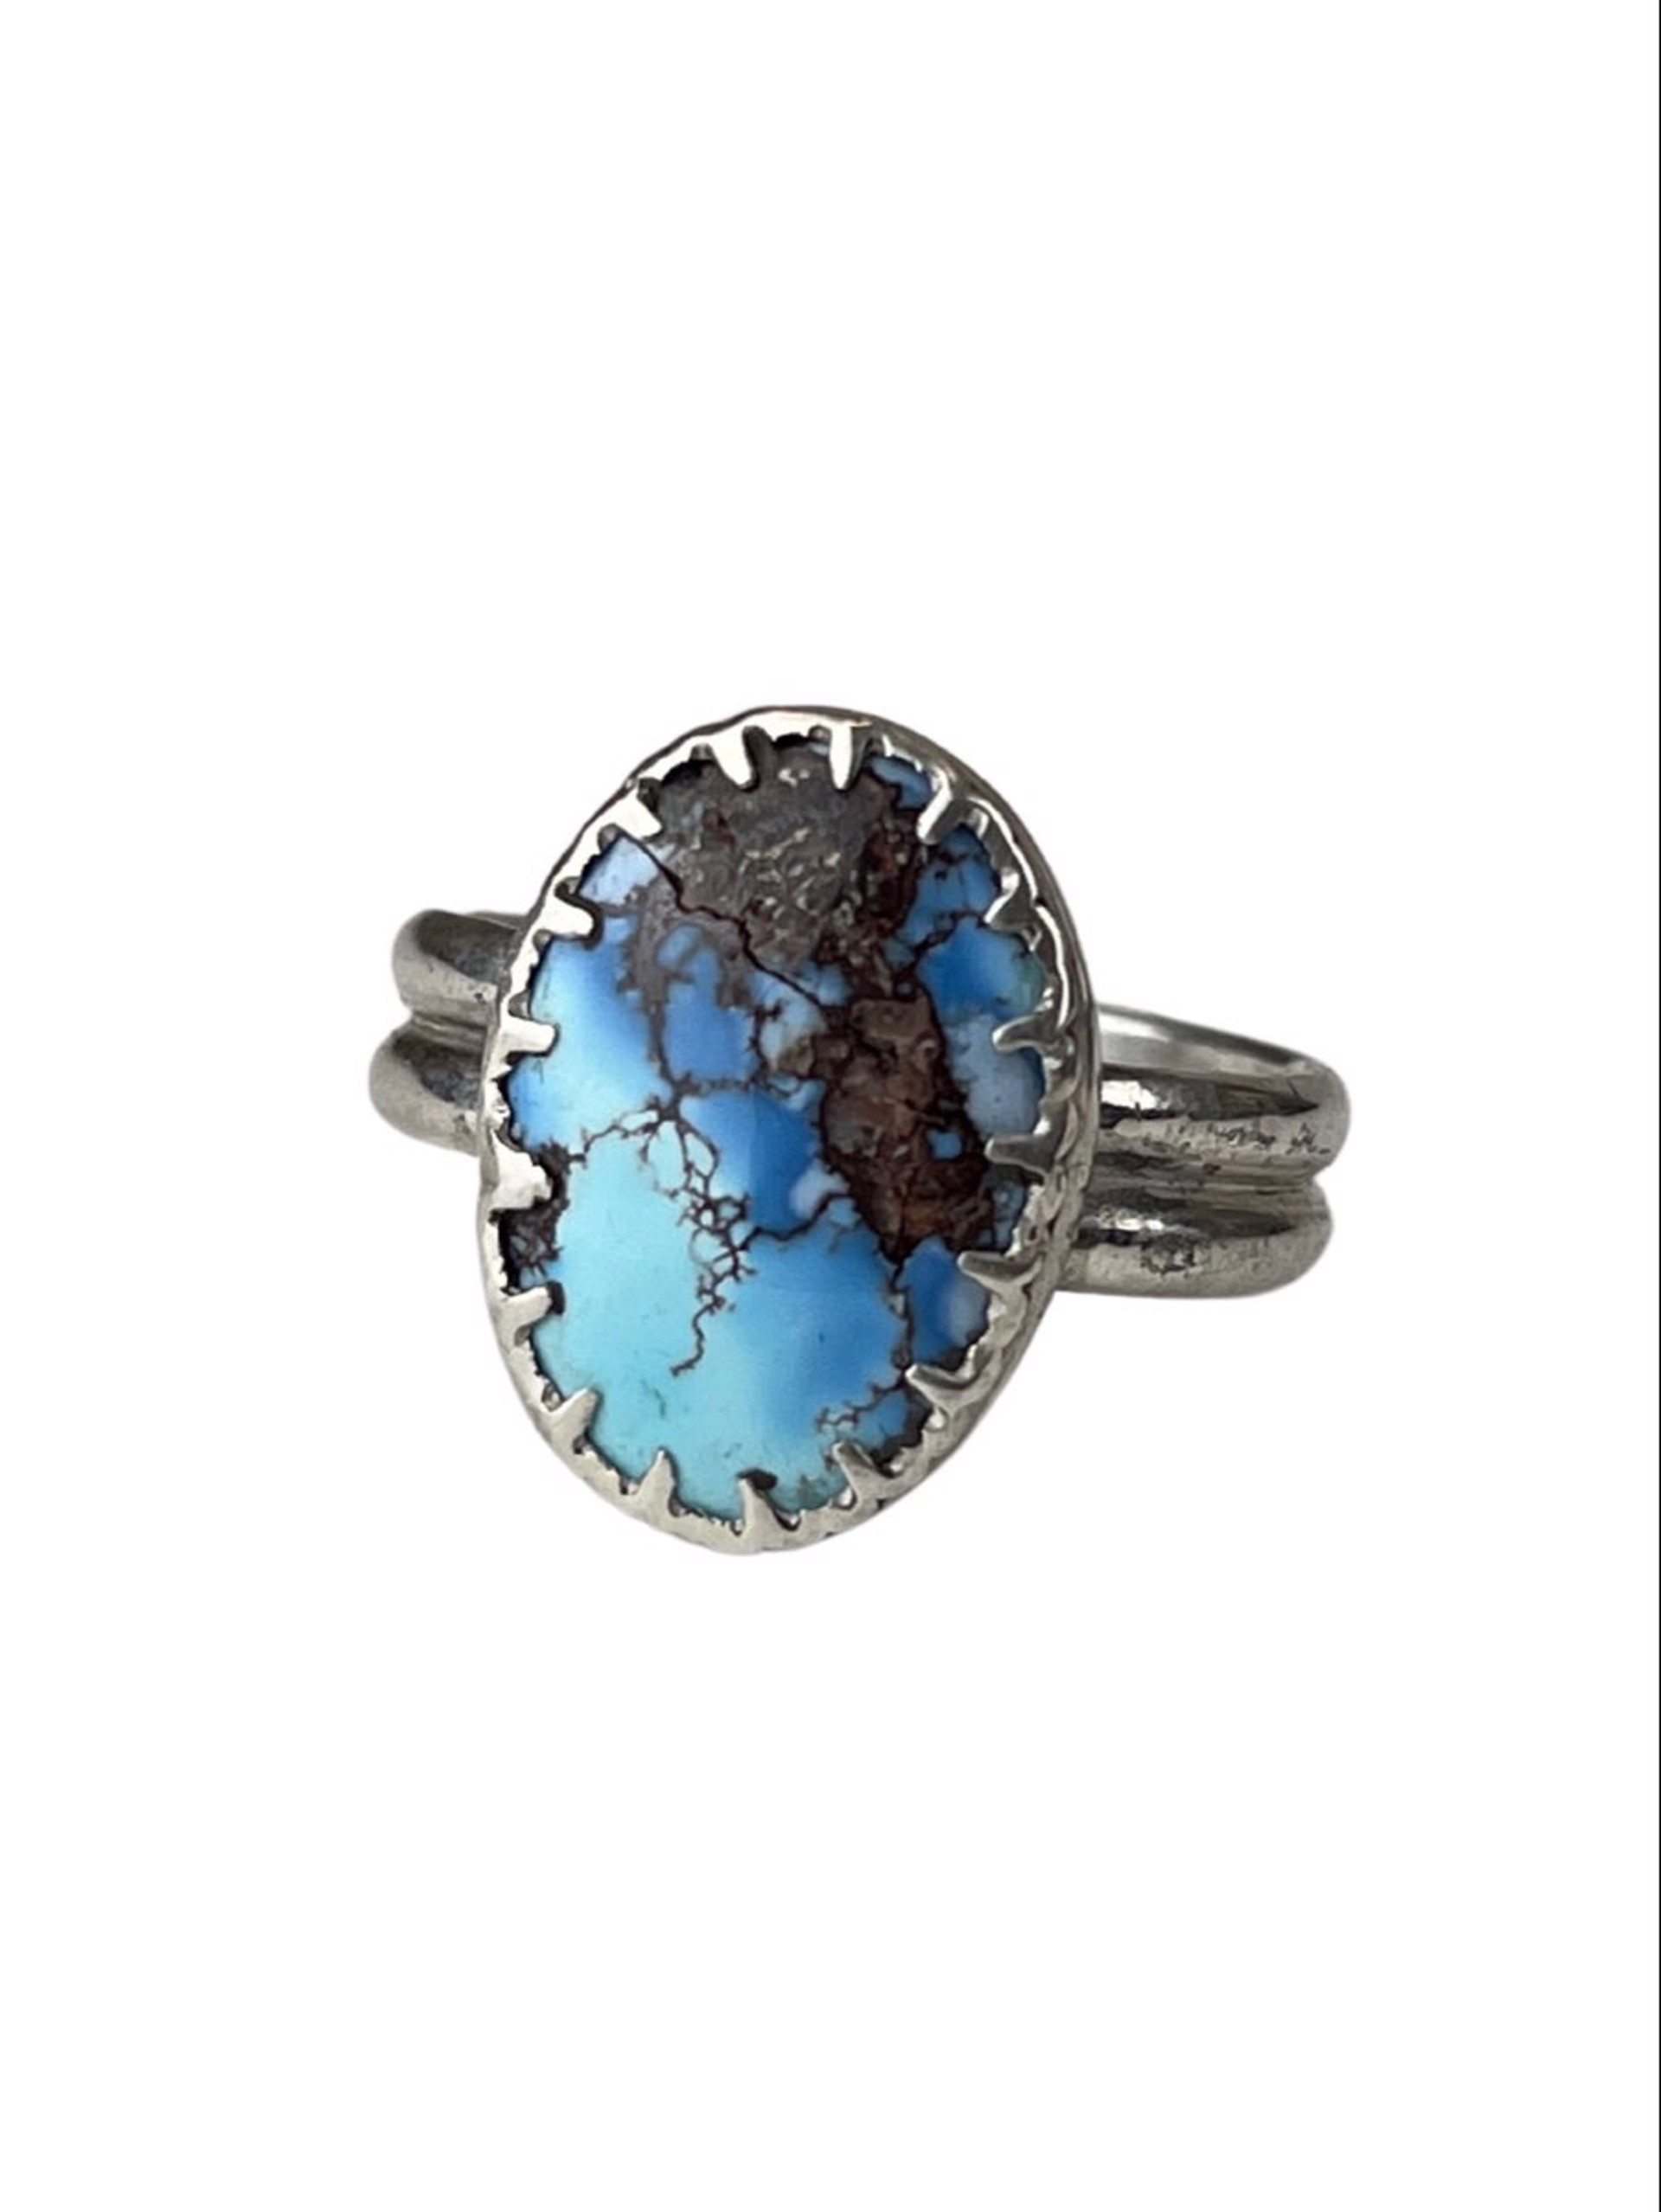 Lavender Turquoise Ring by Nola Smodic